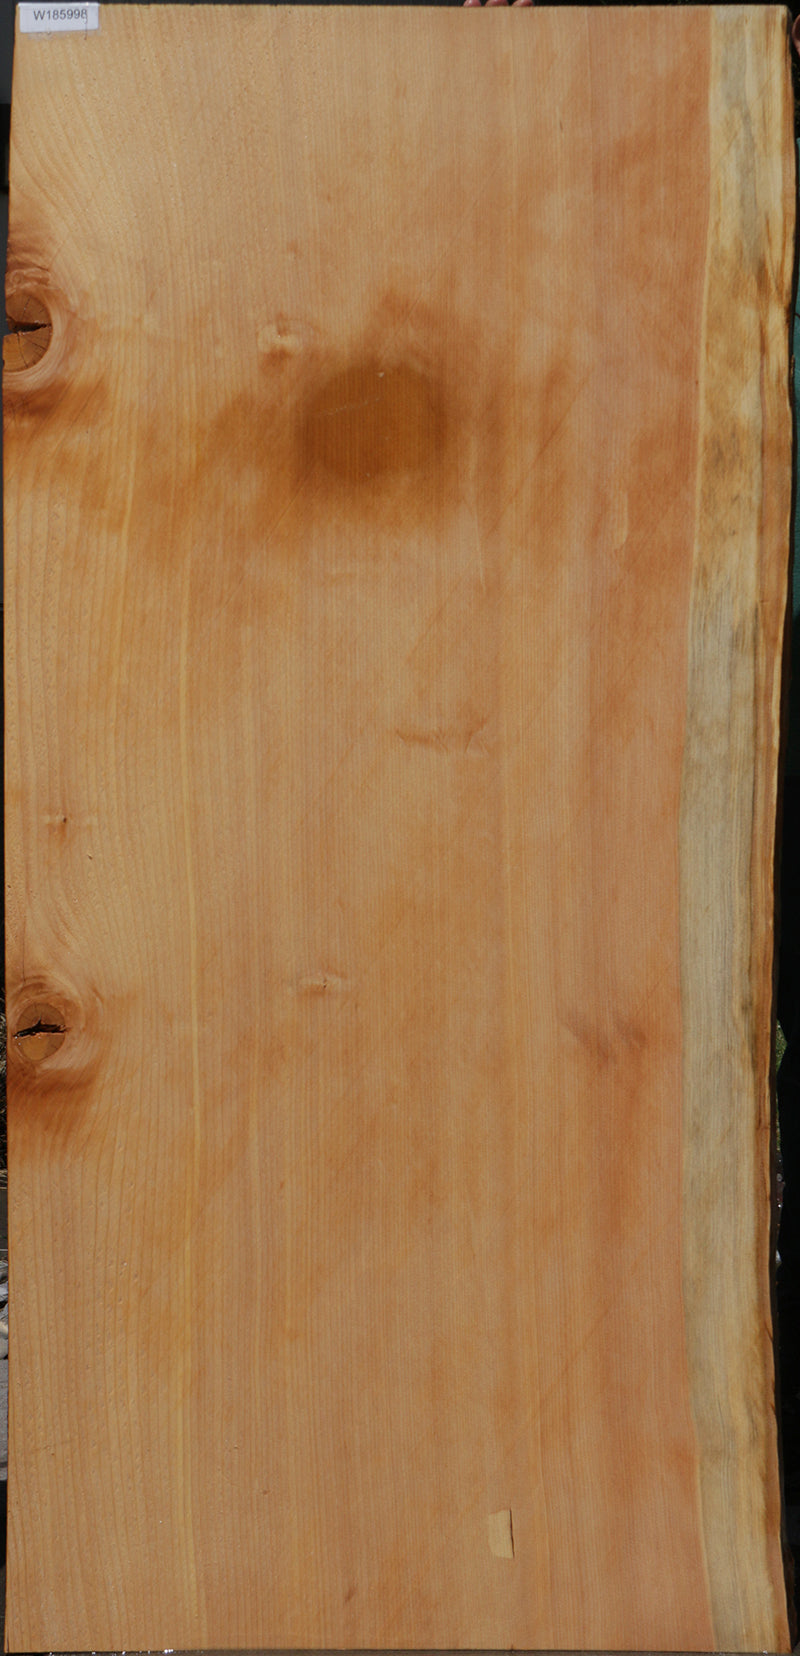 Sitka Spruce Live Edge Lumber (Free Shipping Excluded)